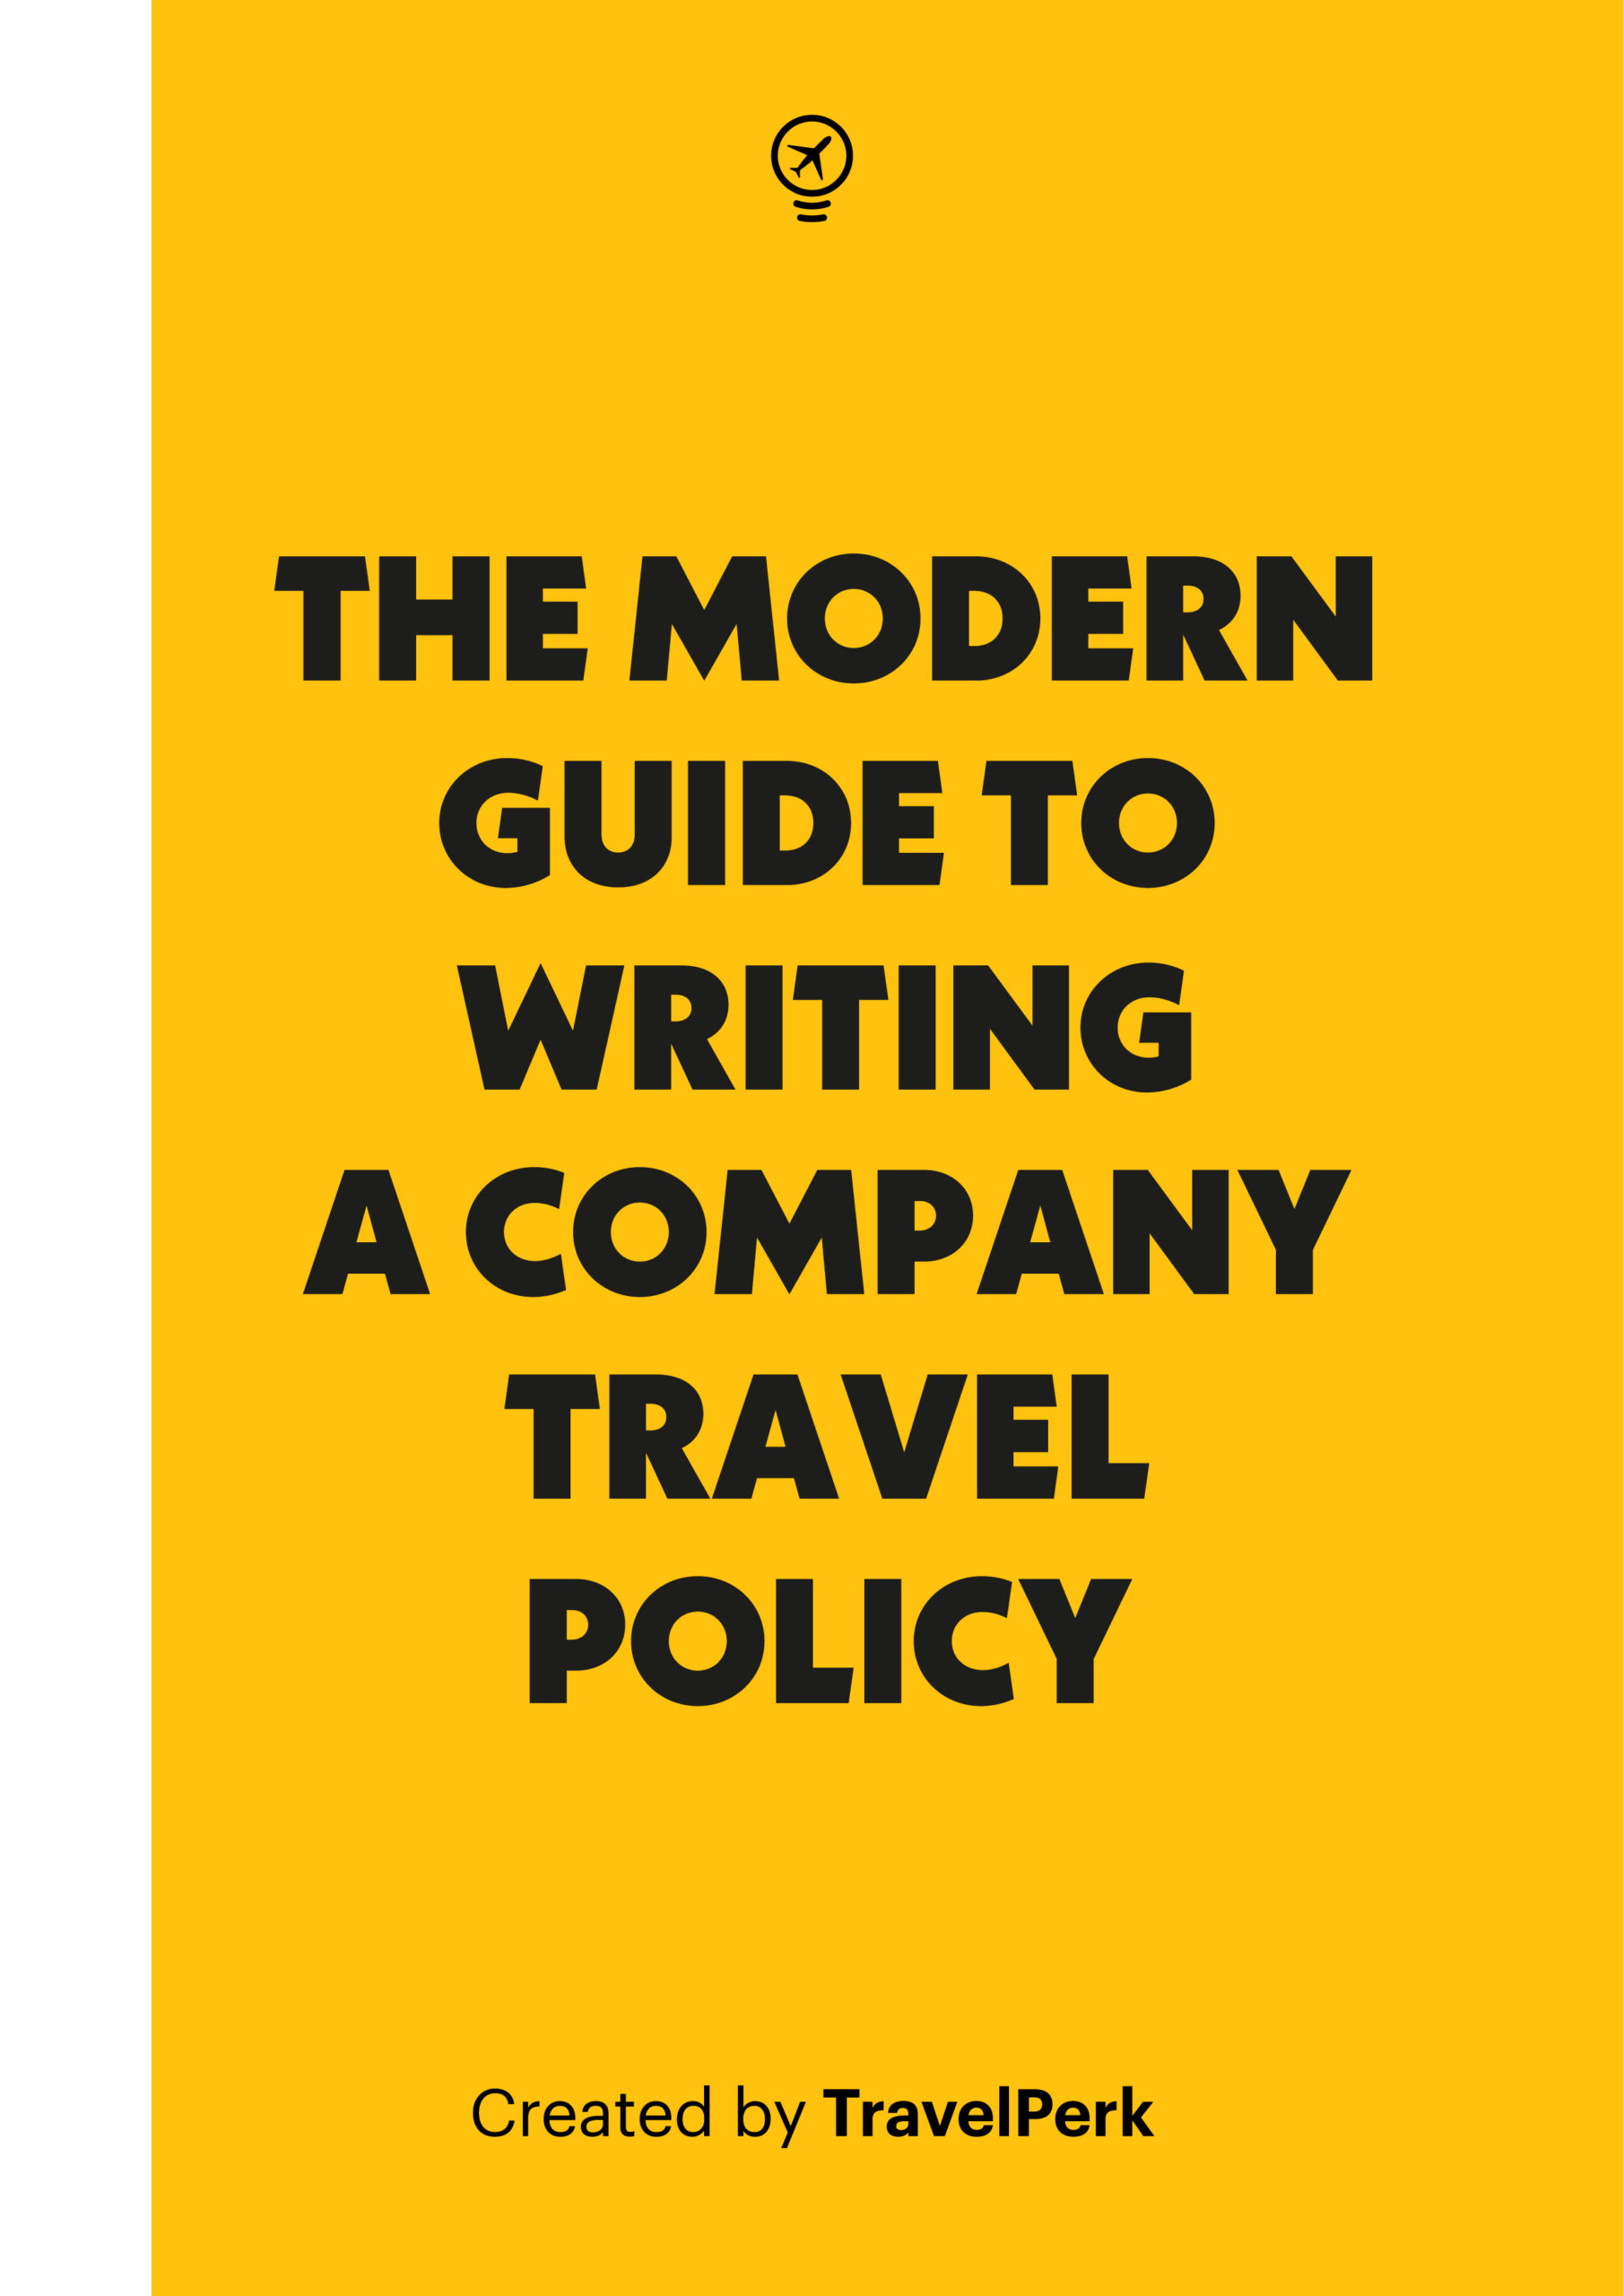 How to write a company travel policy